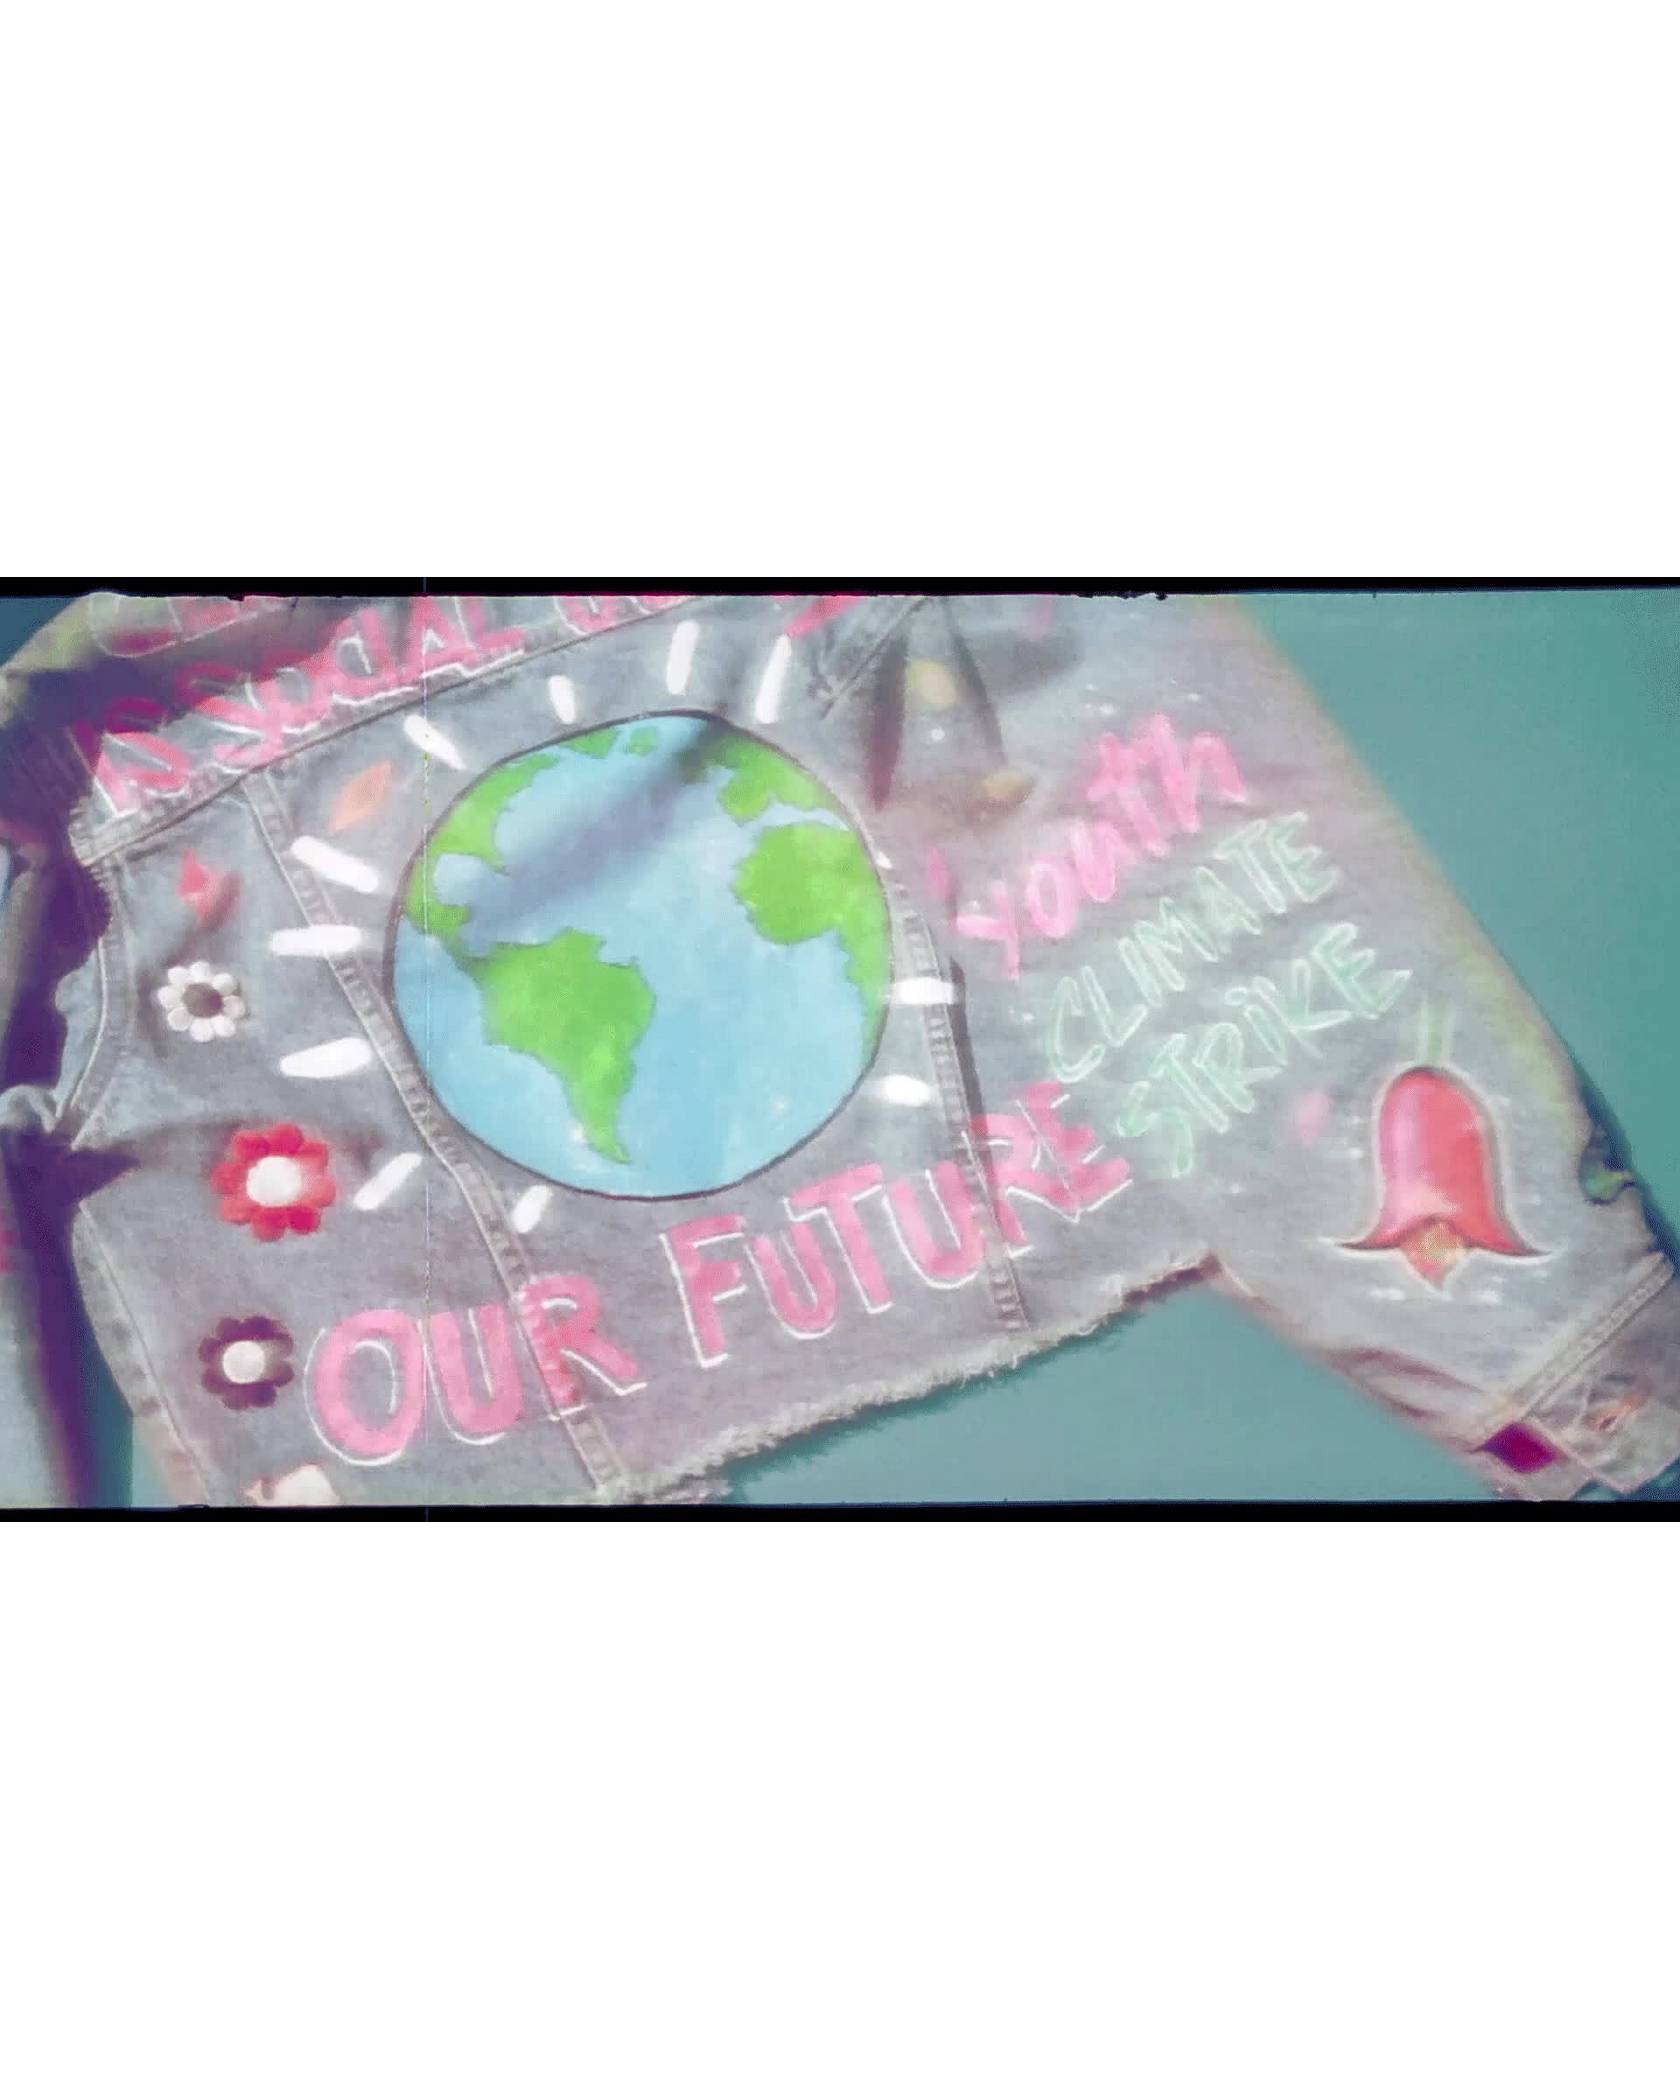 A gif of the back of Xiye's custom Levi's Trucker jacket showing the painted on words, "Climate Justice is Social Justice", "Our Future", and "Youth Climate Strike" additionally the back of the jacket features a painting of the globe.